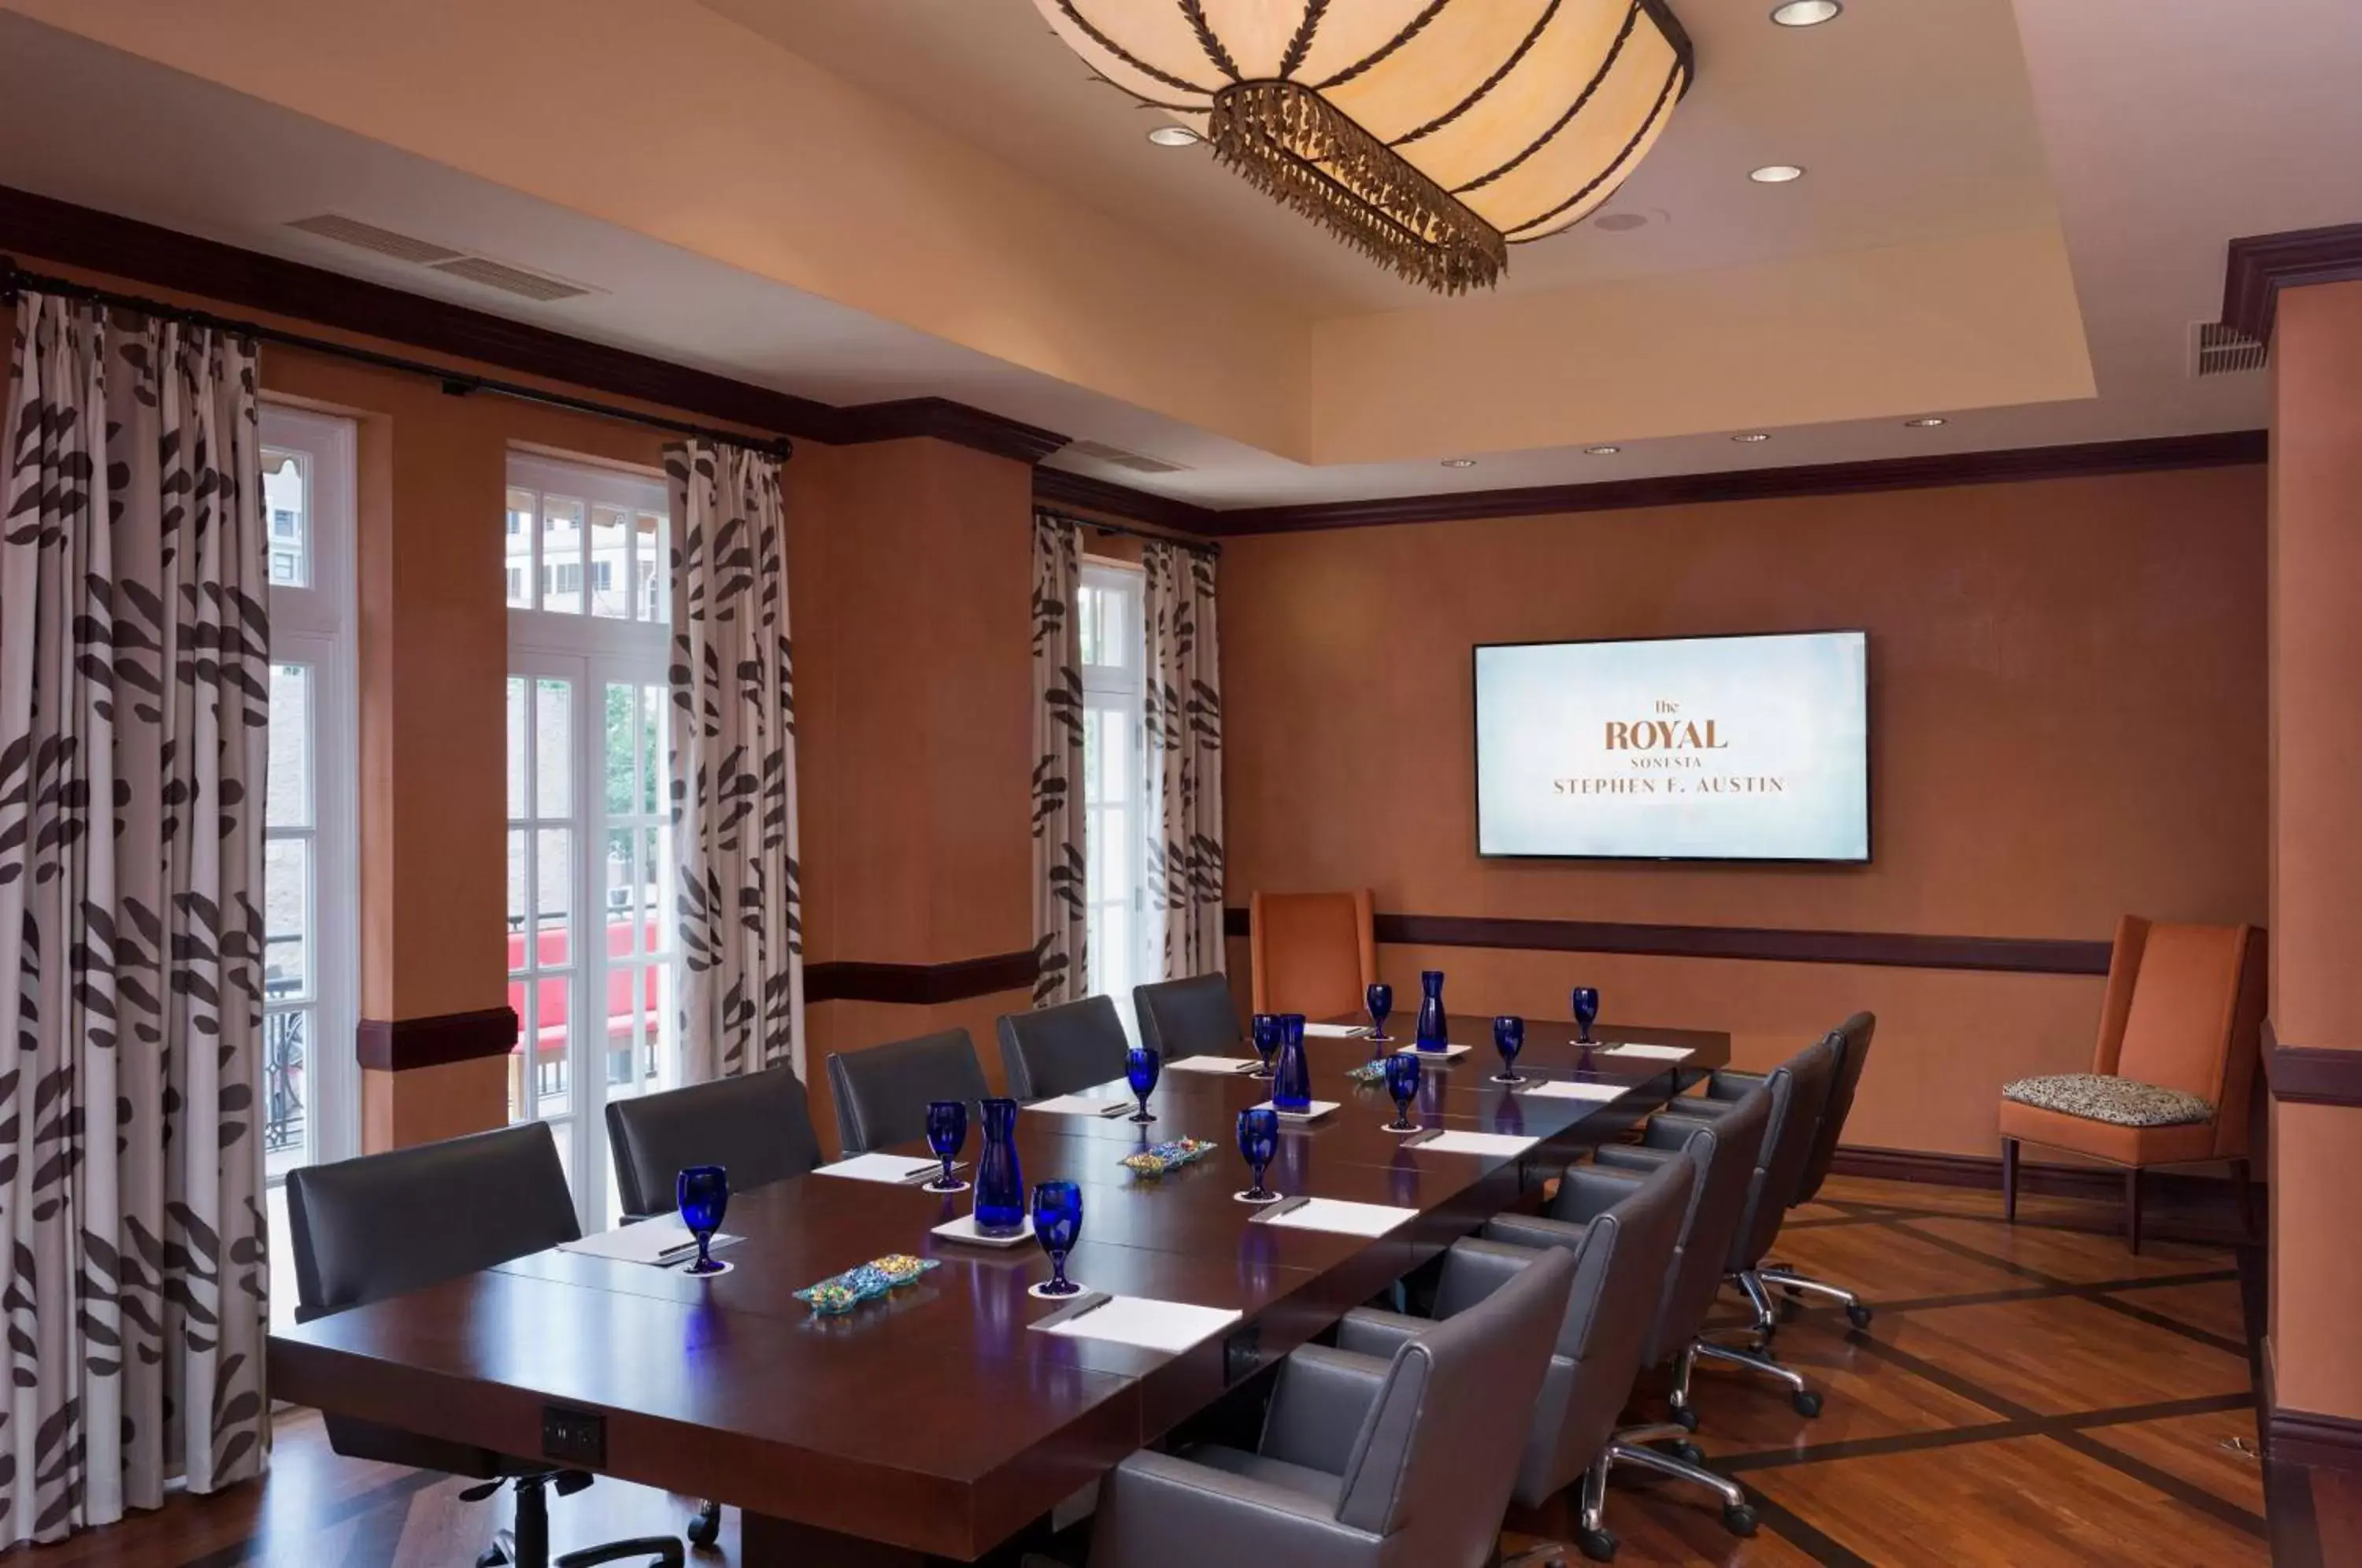 Meeting/conference room in The Stephen F Austin Royal Sonesta Hotel